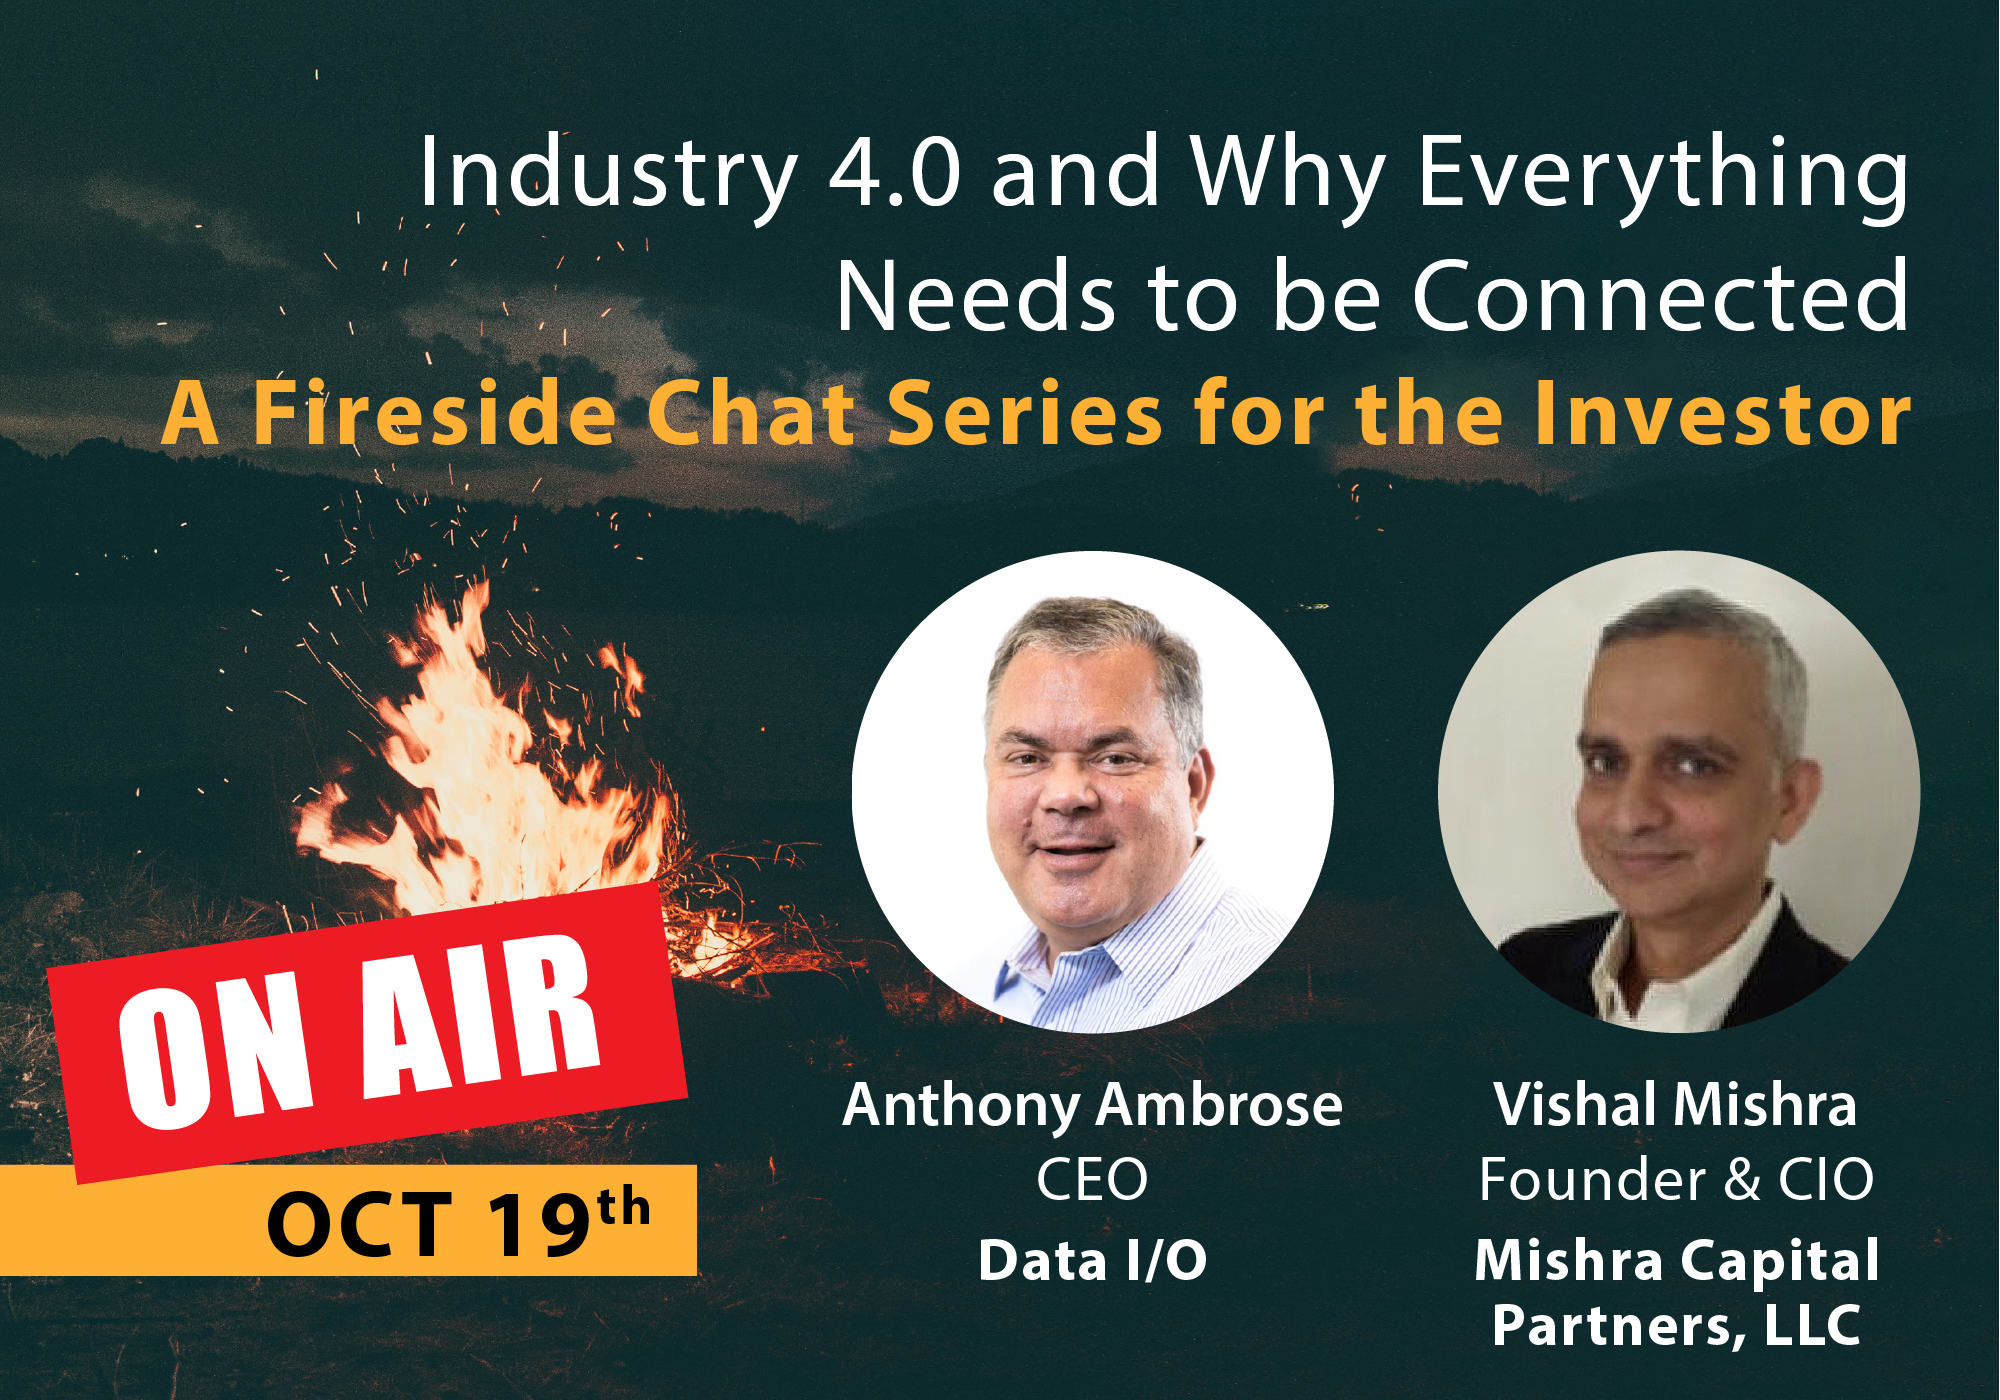 Fireside Chat with Vishal Mishra and Anthony Ambrose